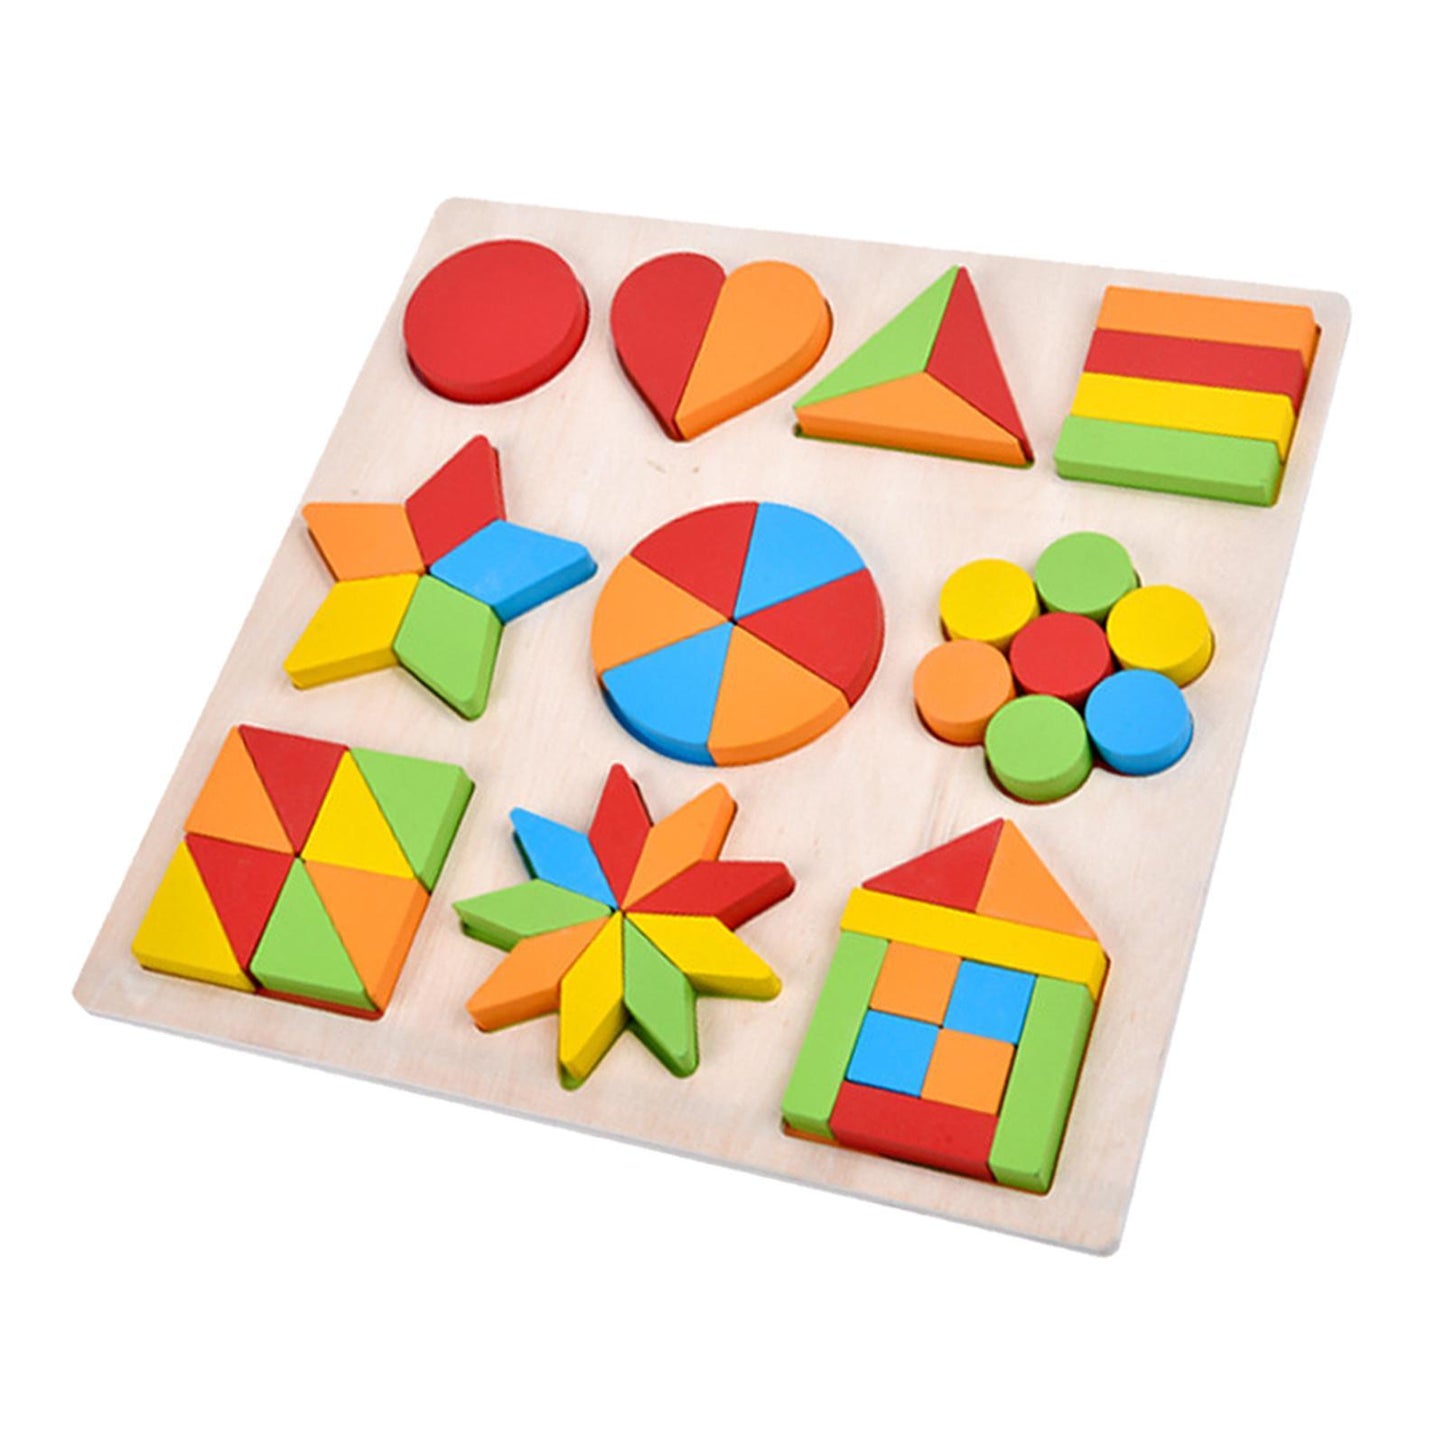 Wooden Colorful Jigsaw Shape Puzzle Board